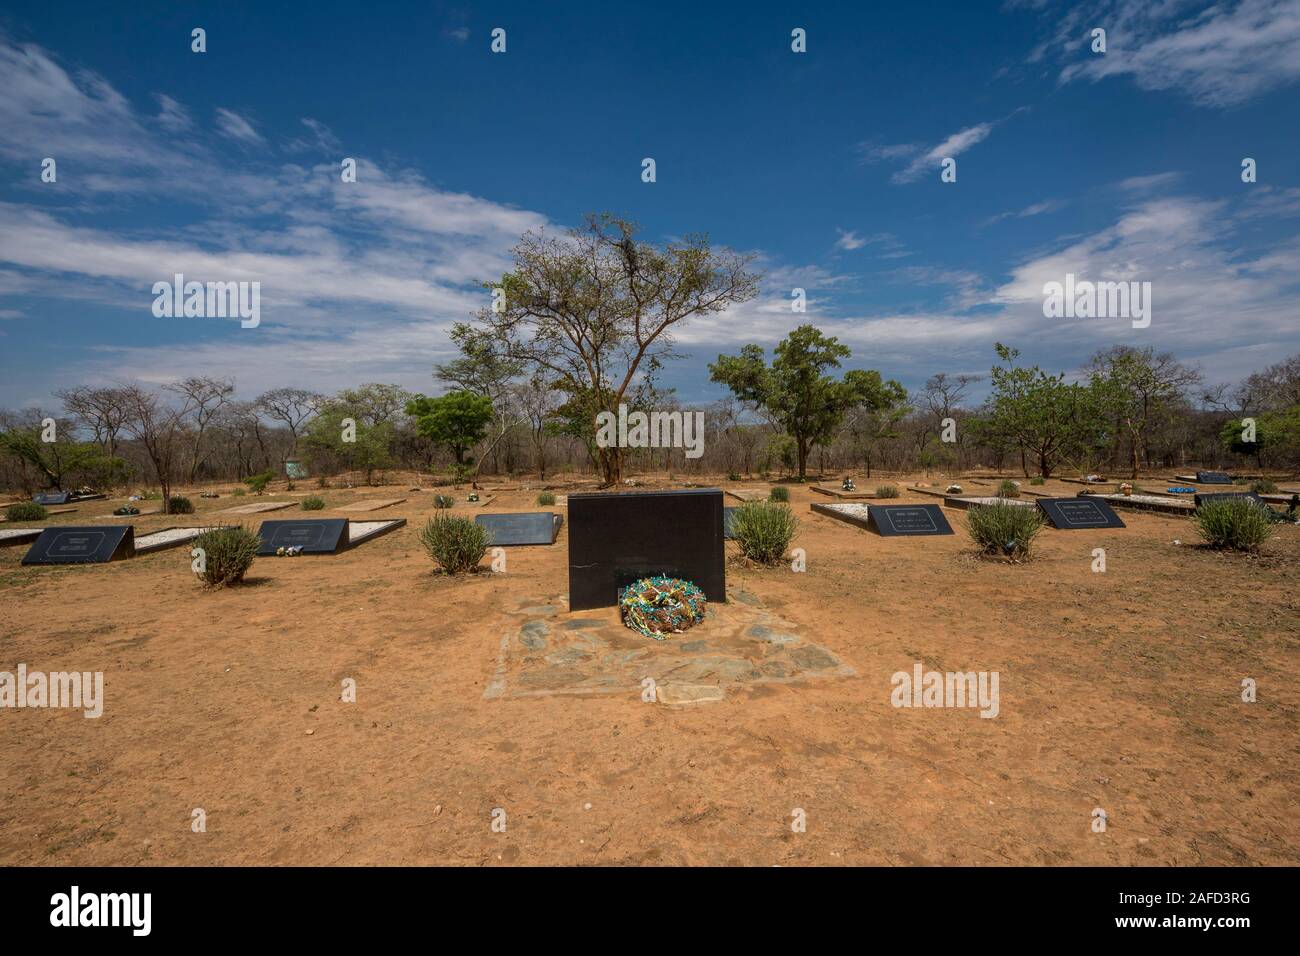 Chinoyi (Sinoia), Zimbabwe. The Mashonaland West Provincial Heroes Acre, the site of the first battle between Rhodesian forces and ZANU guerillas in the Rhodesian Bush War/Zimbabwe Independence war. Stock Photo